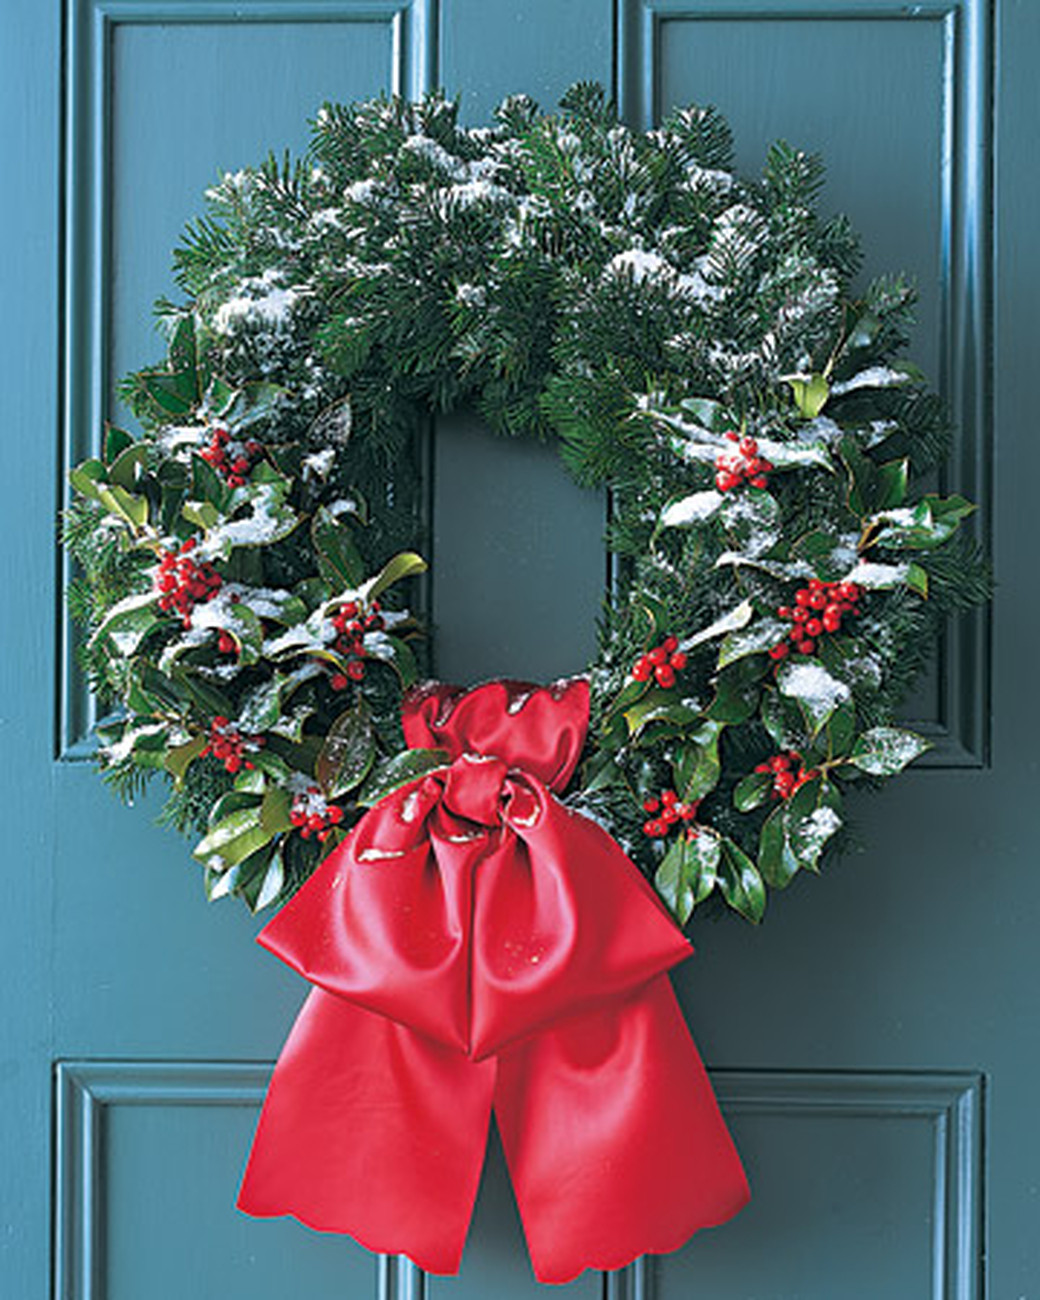 DIY Christmas Wreaths For Front Door
 Our Favorite DIY Holiday Wreaths for your Front Door